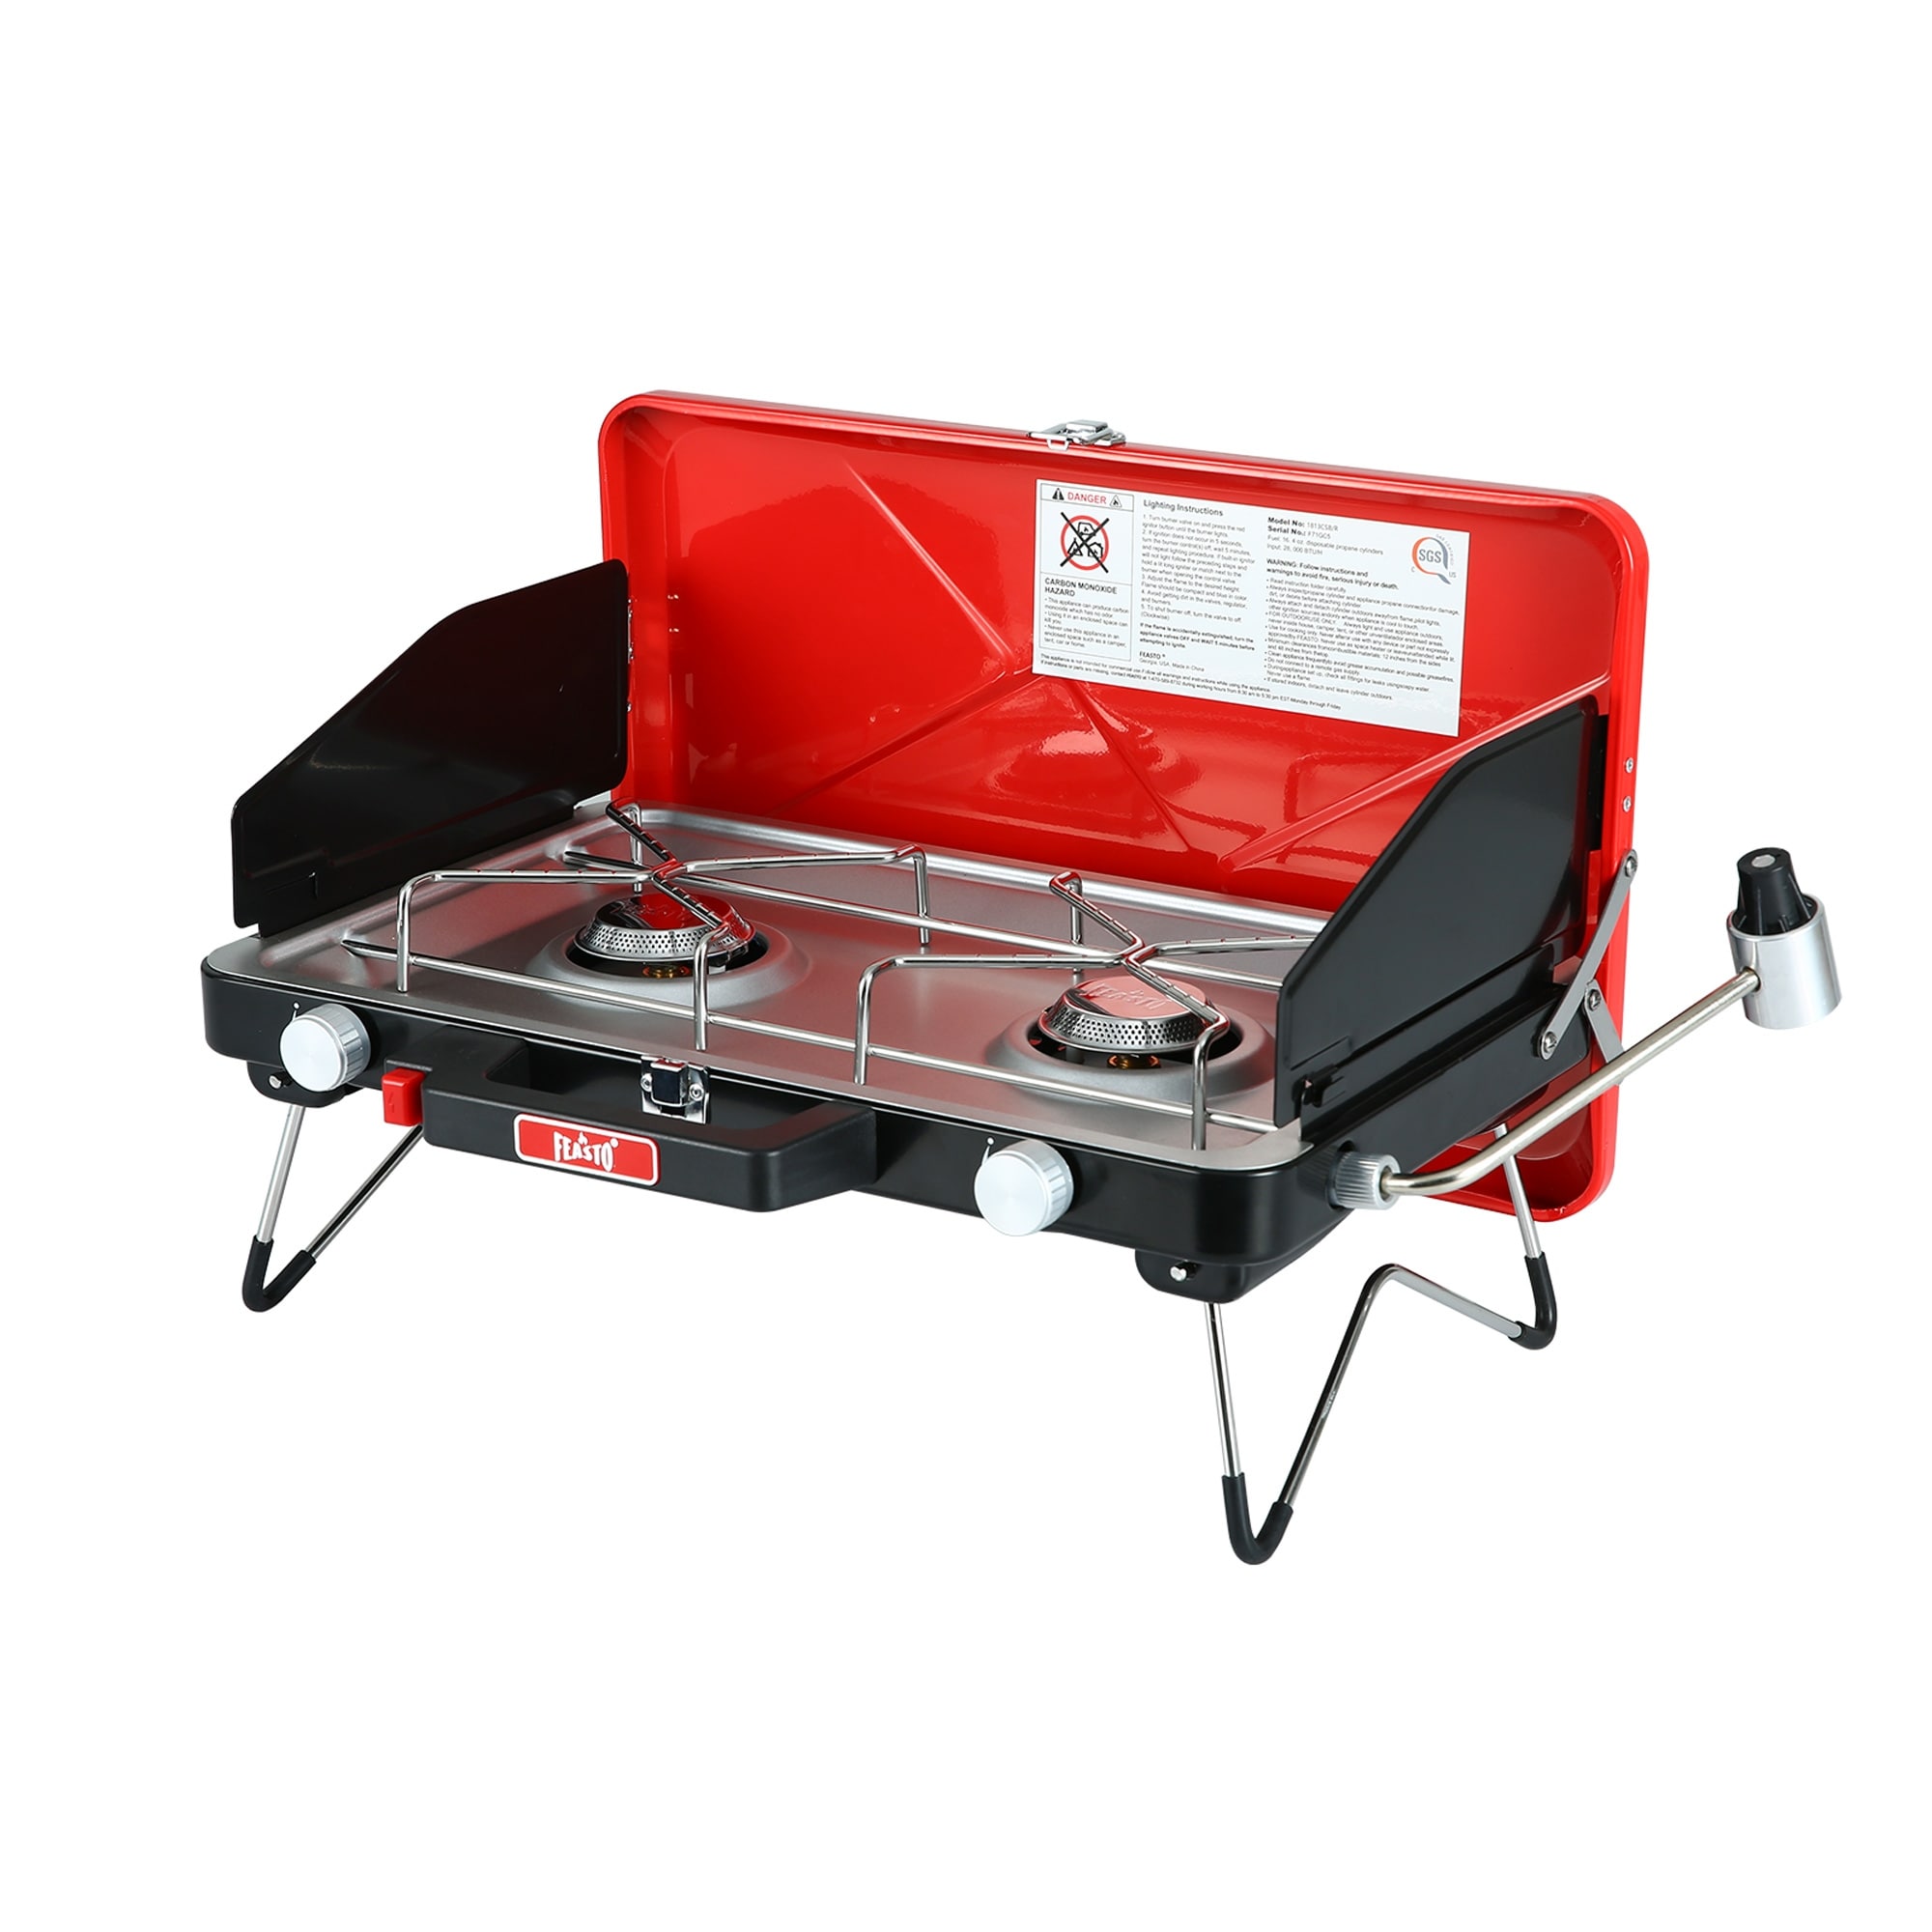 Feasto Propane Portable Camping Stoves With 28000 Btu - N/a